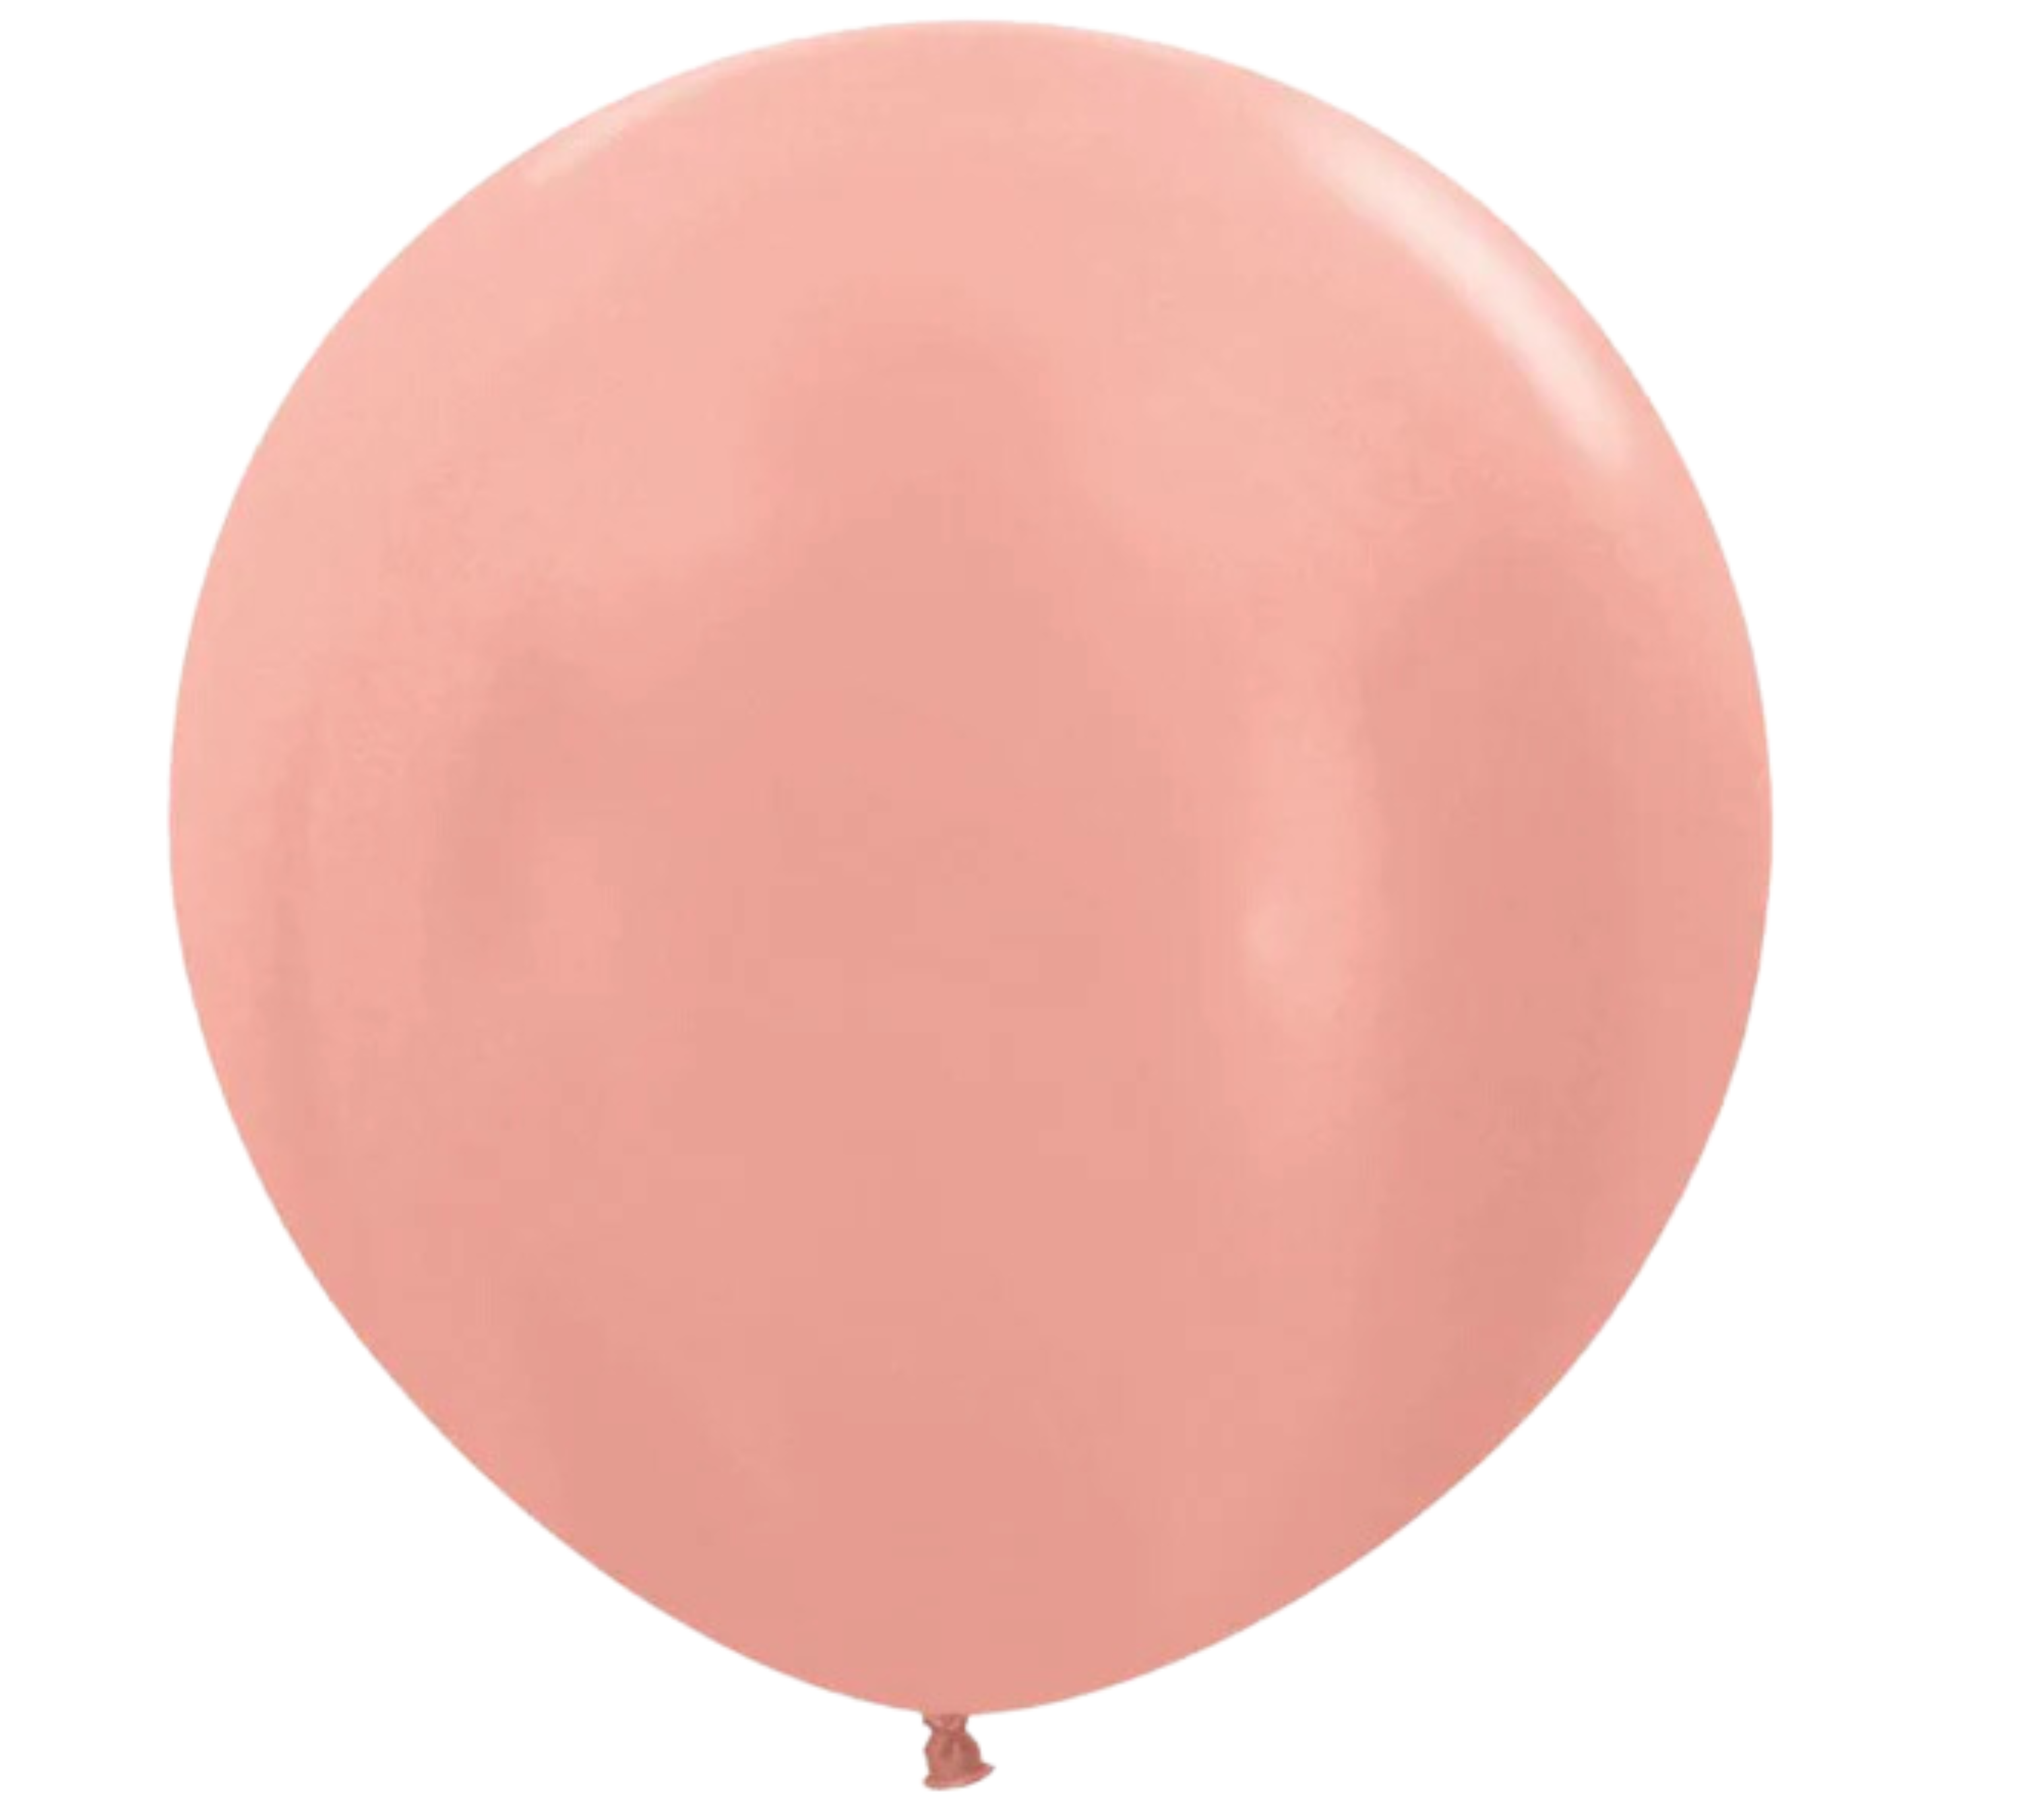 36" Sempertex Metallic Pearlized Rose Gold Latex Balloons - 3 Foot Giant | 2 Count